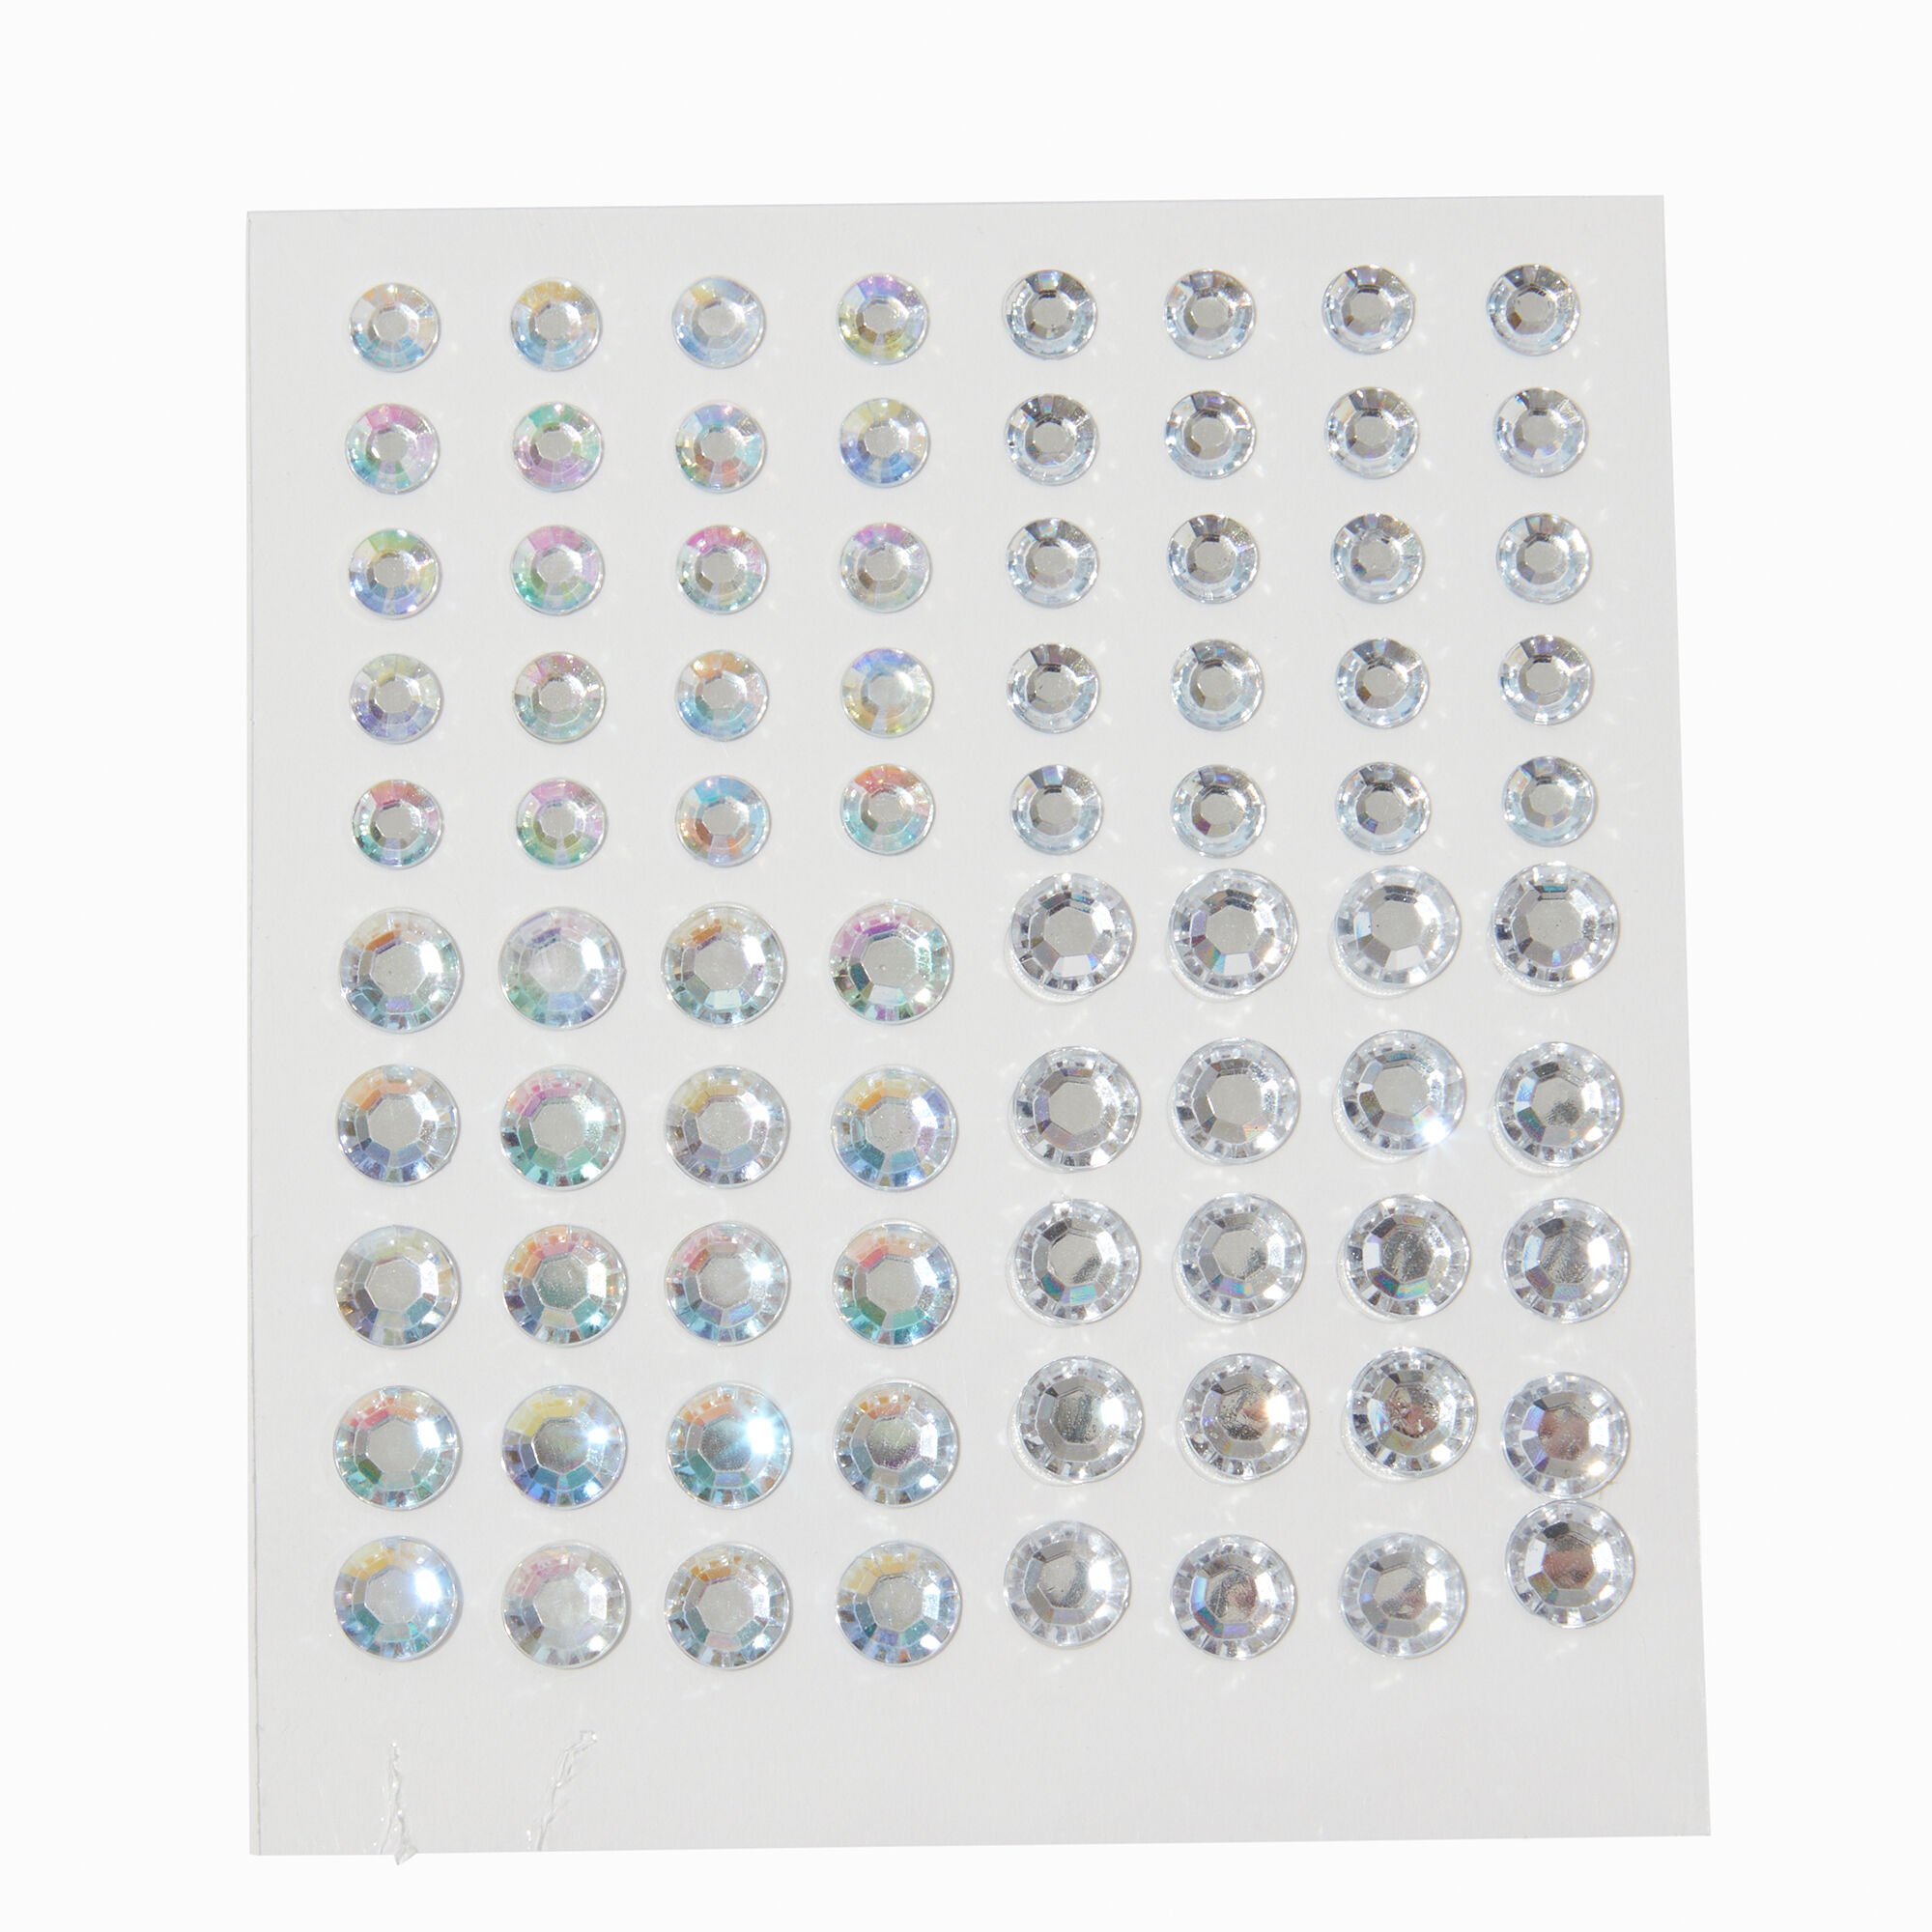 View Claires Iridescent Crystal Hair Gems 80 Pack information